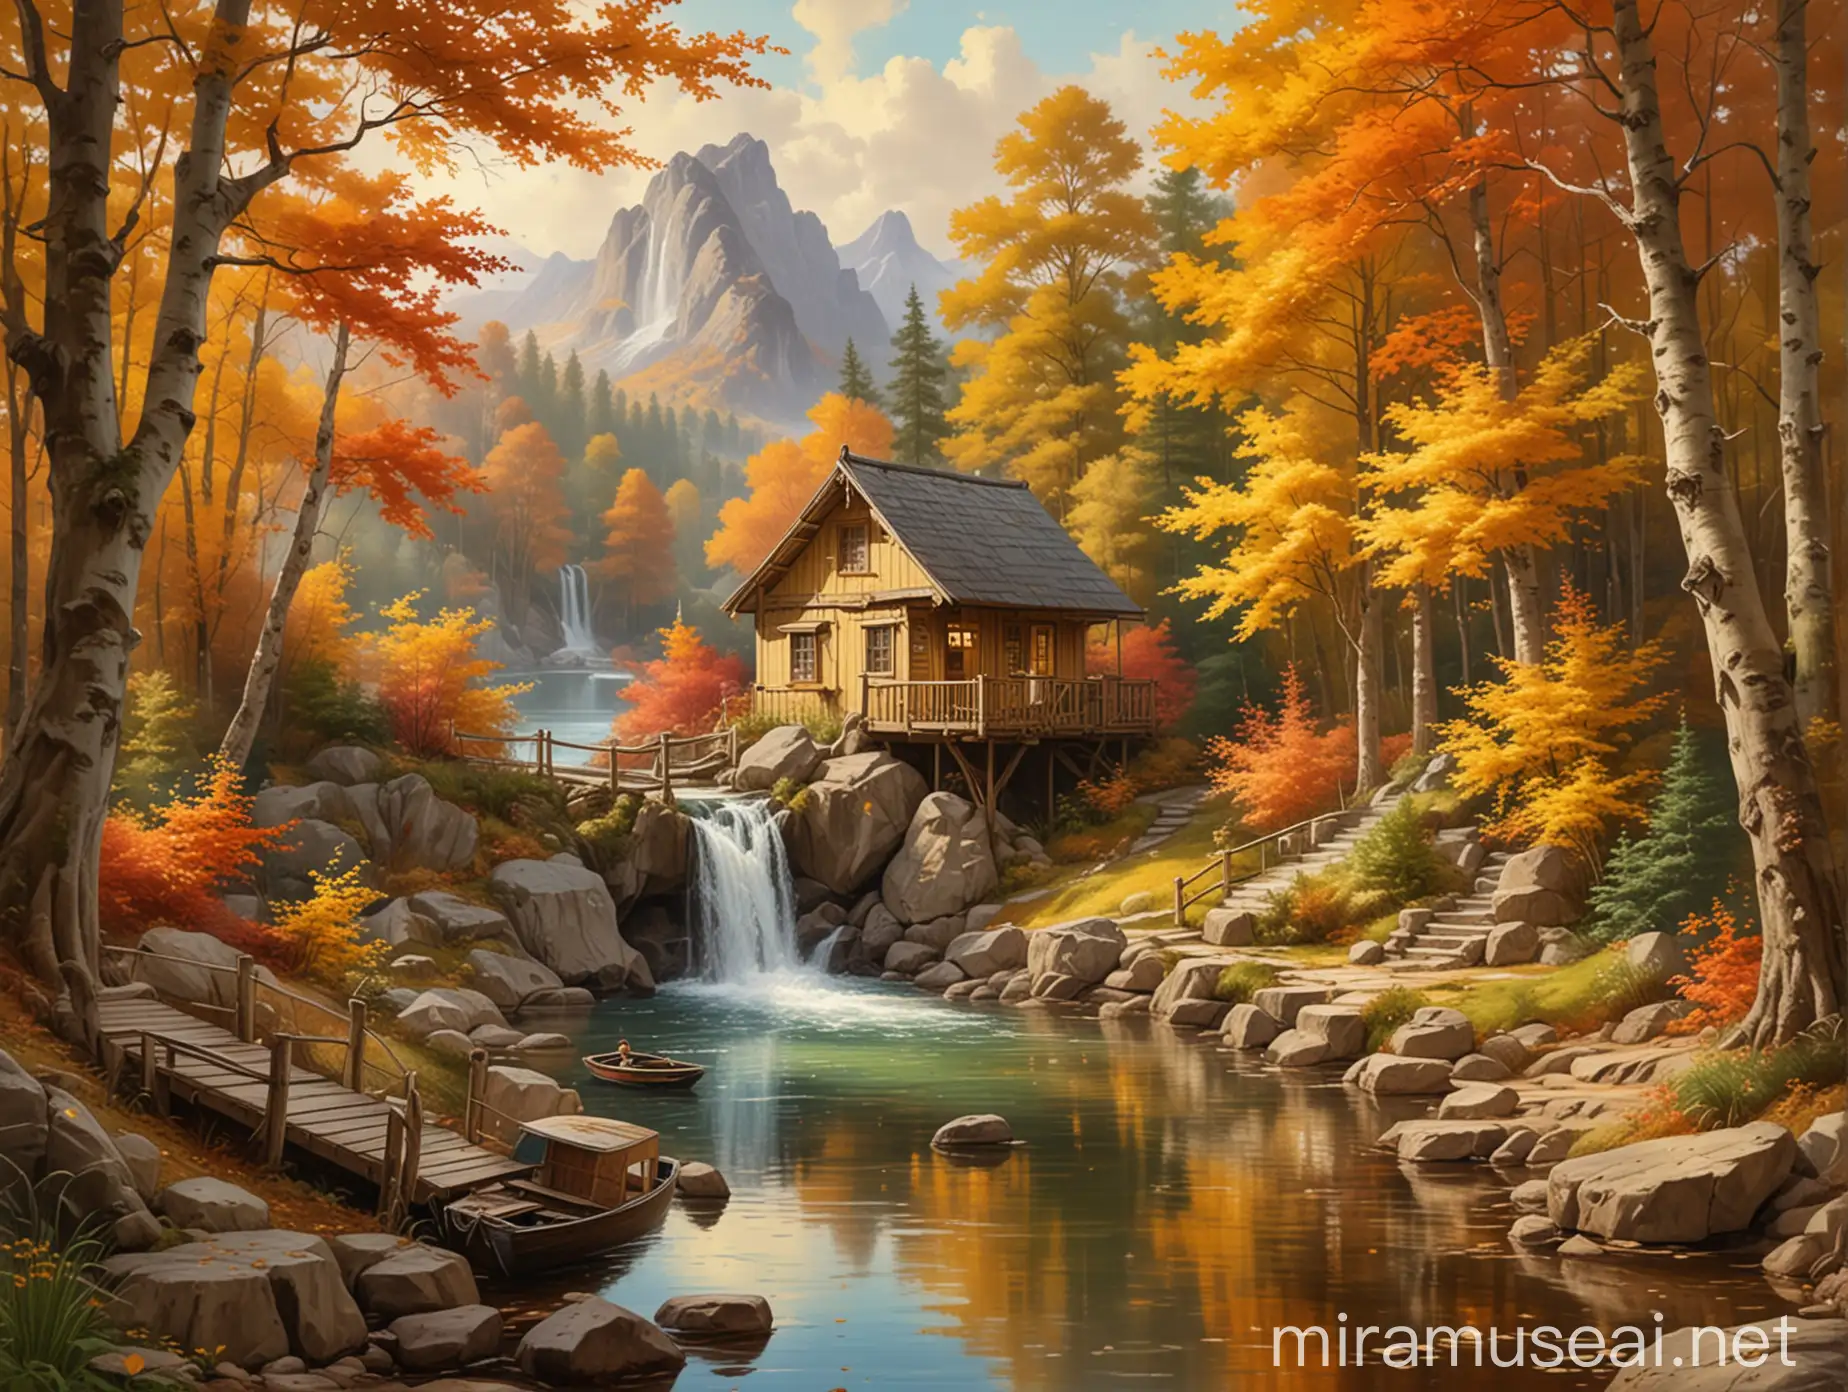 Autumn Forest Landscape with Waterfall Lake and Wooden Home